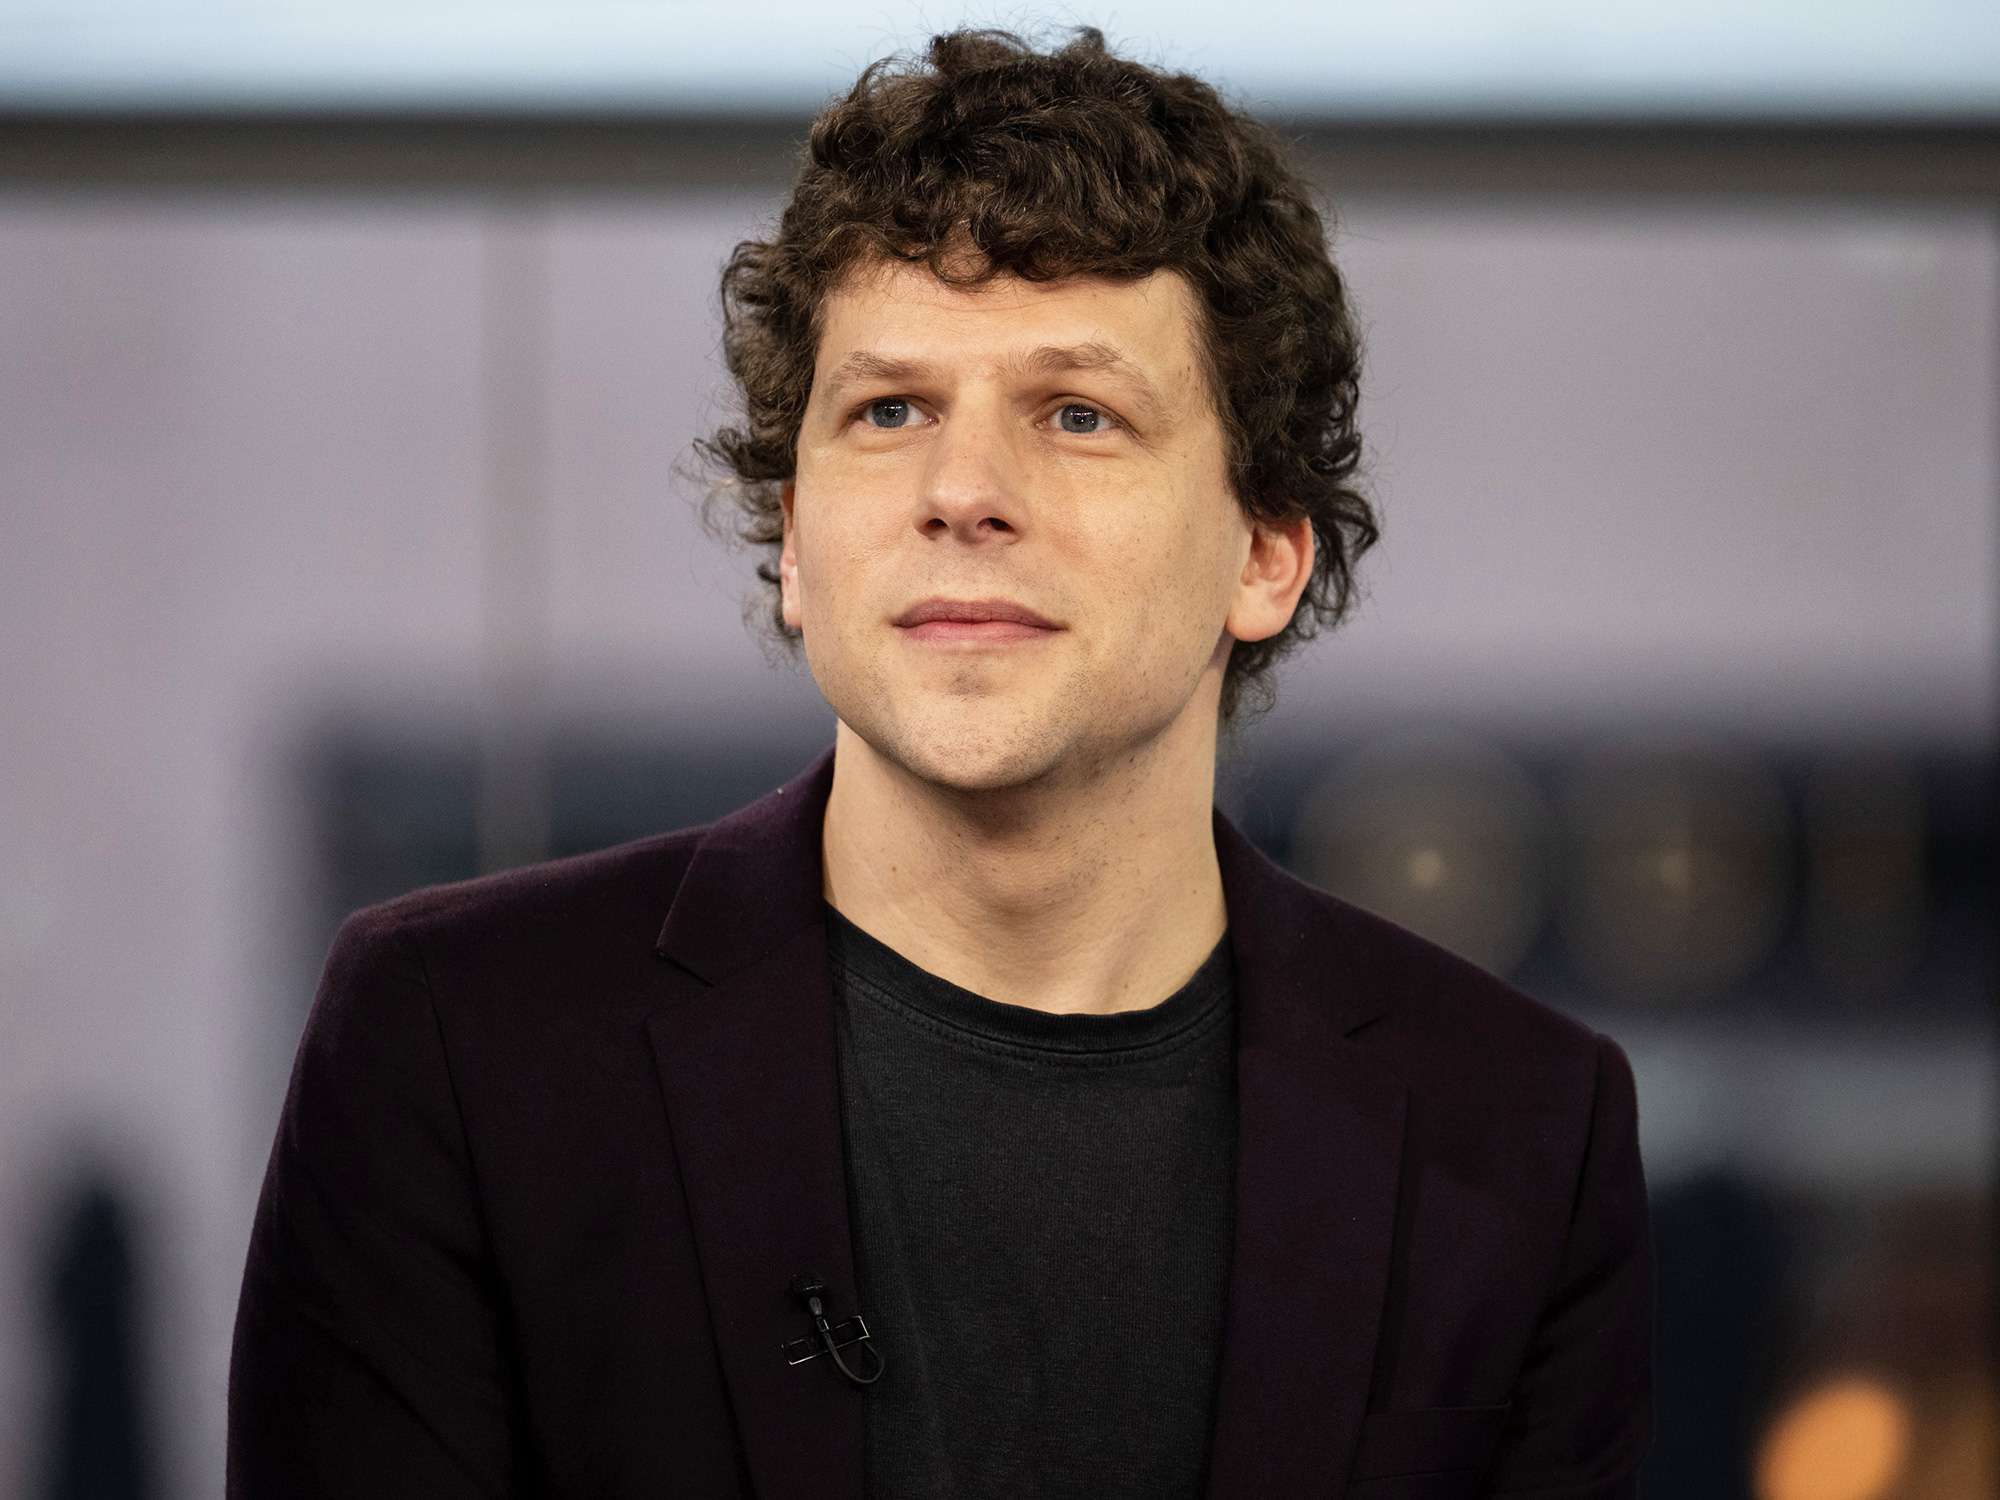 Jesse Eisenberg Applied for Polish Citizenship Since He and Wife Want a 'Greater Connection to Poland'